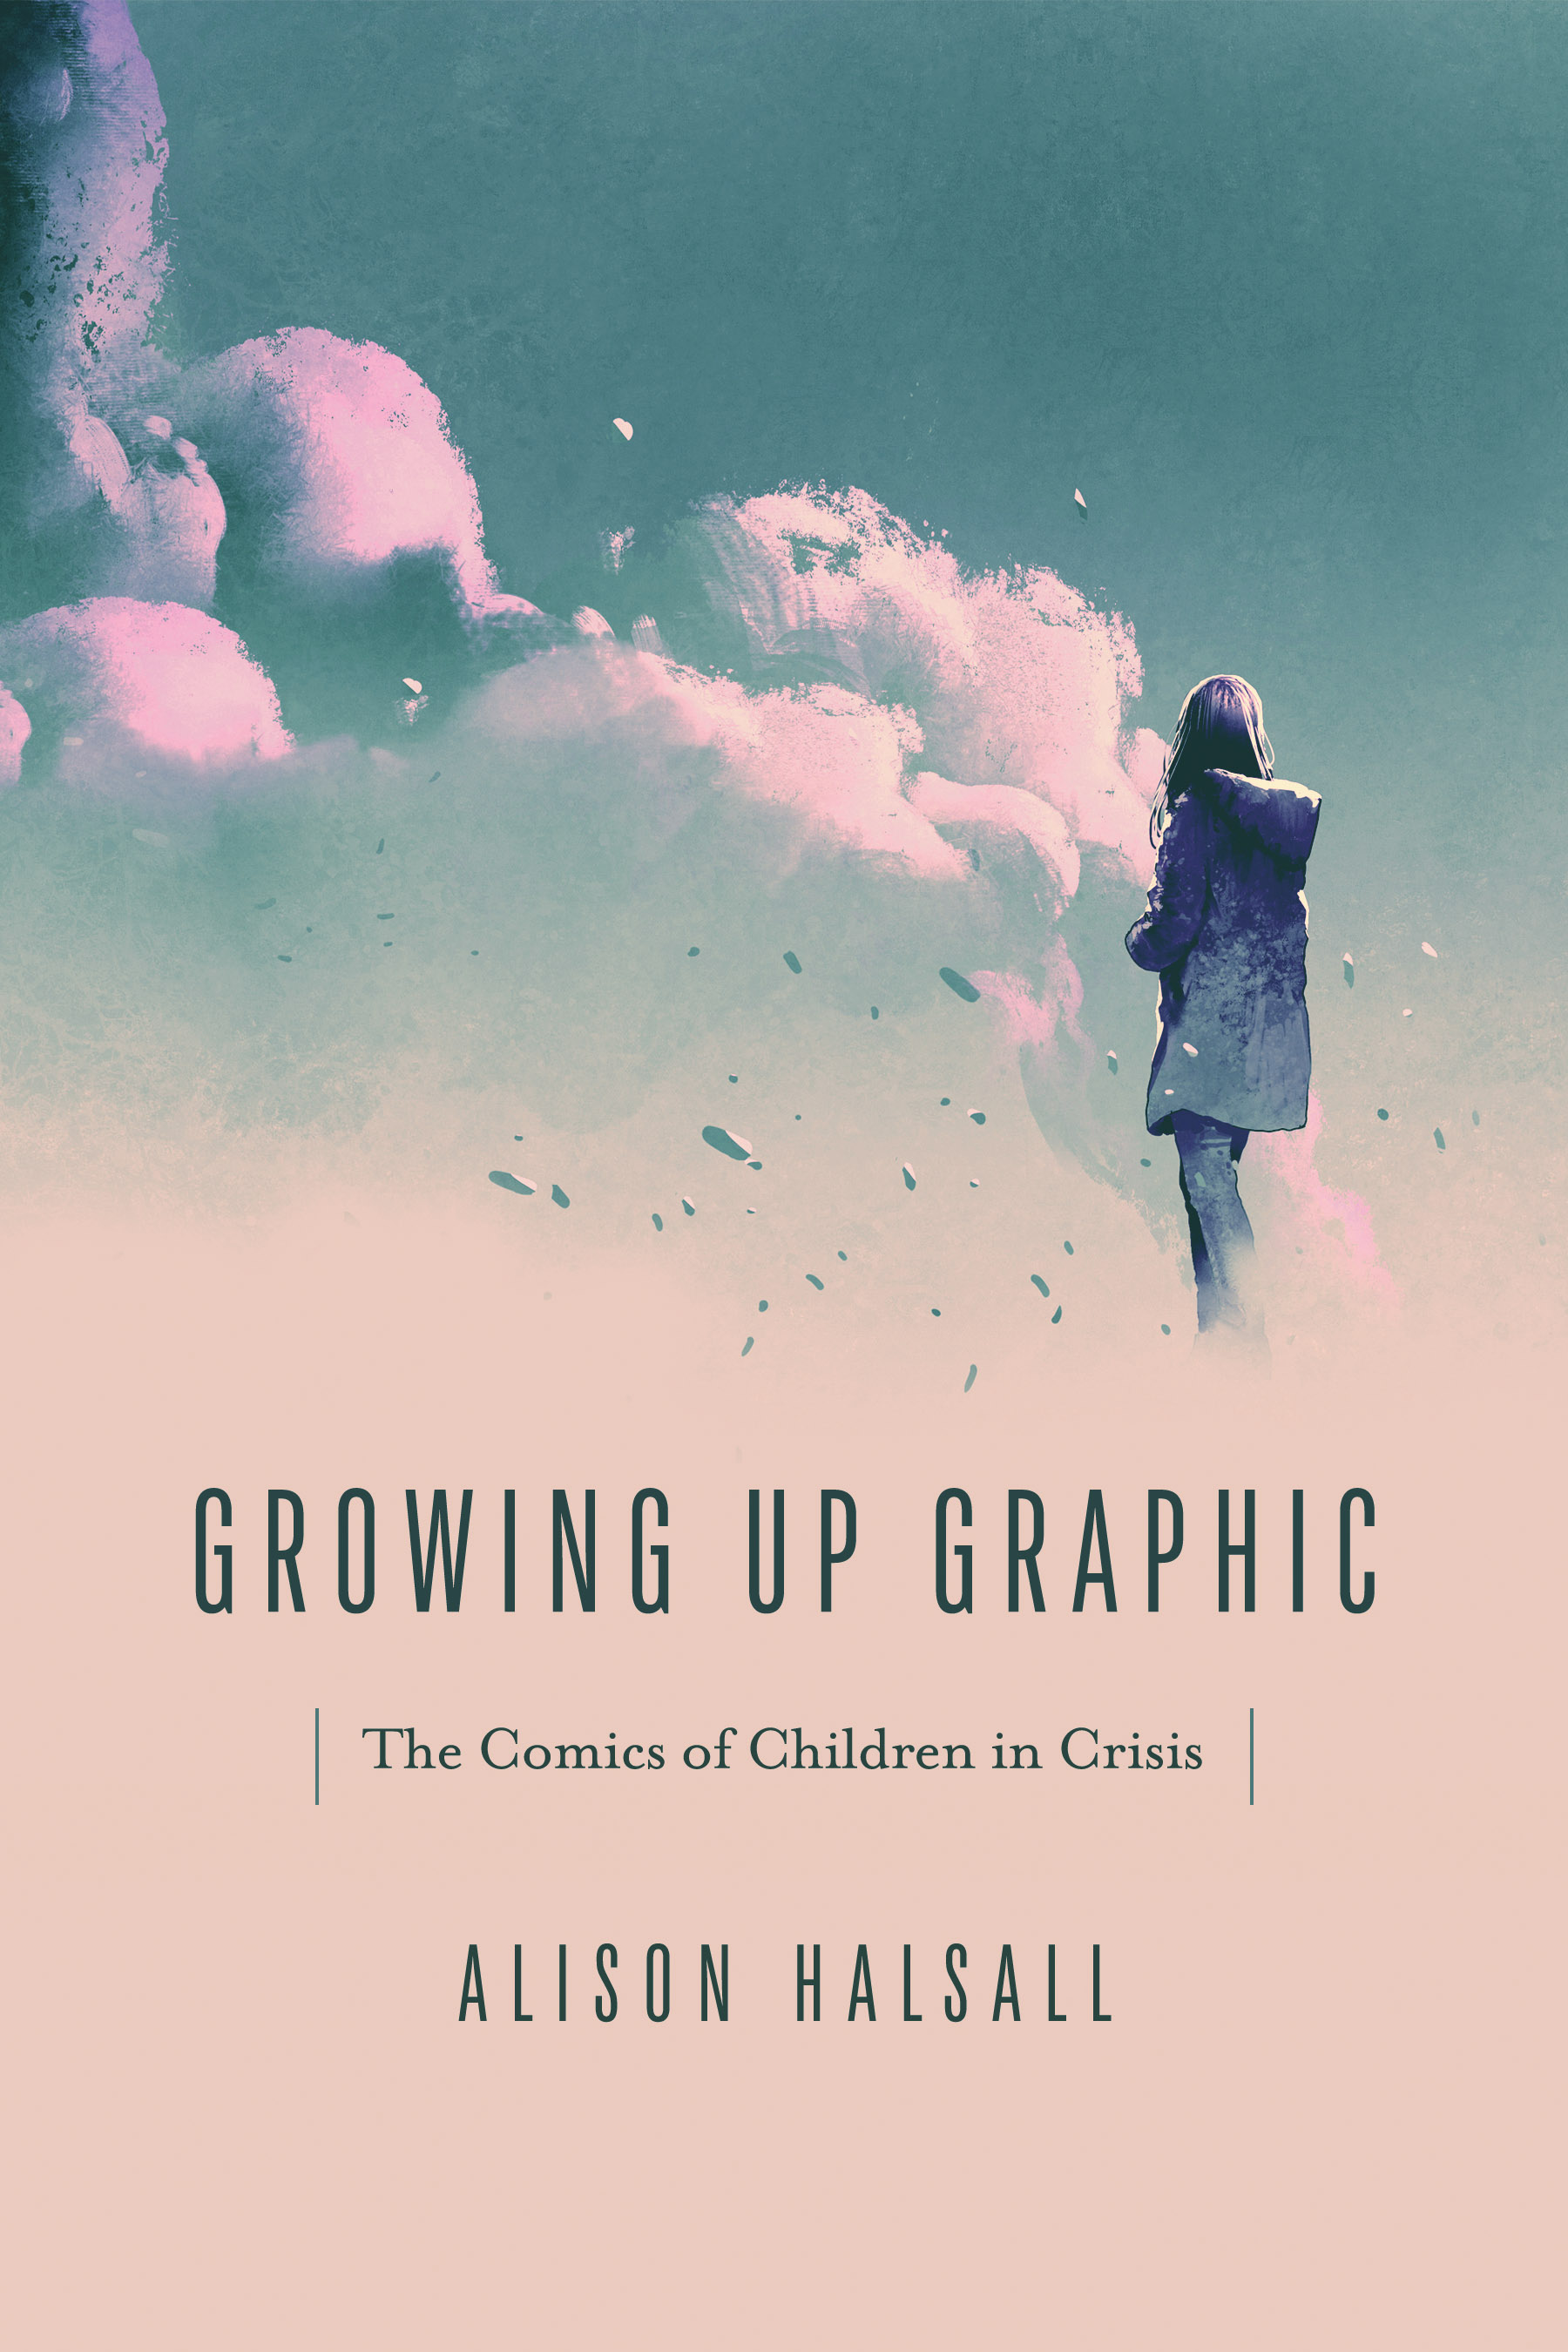 Front cover of Growing Up Graphic: The Comics of Children in Crisis by Alison Halsall, featuring a young girl in a blue coat, facing away from the viewer, standing against a backdrop of pink and blue puffy clouds.